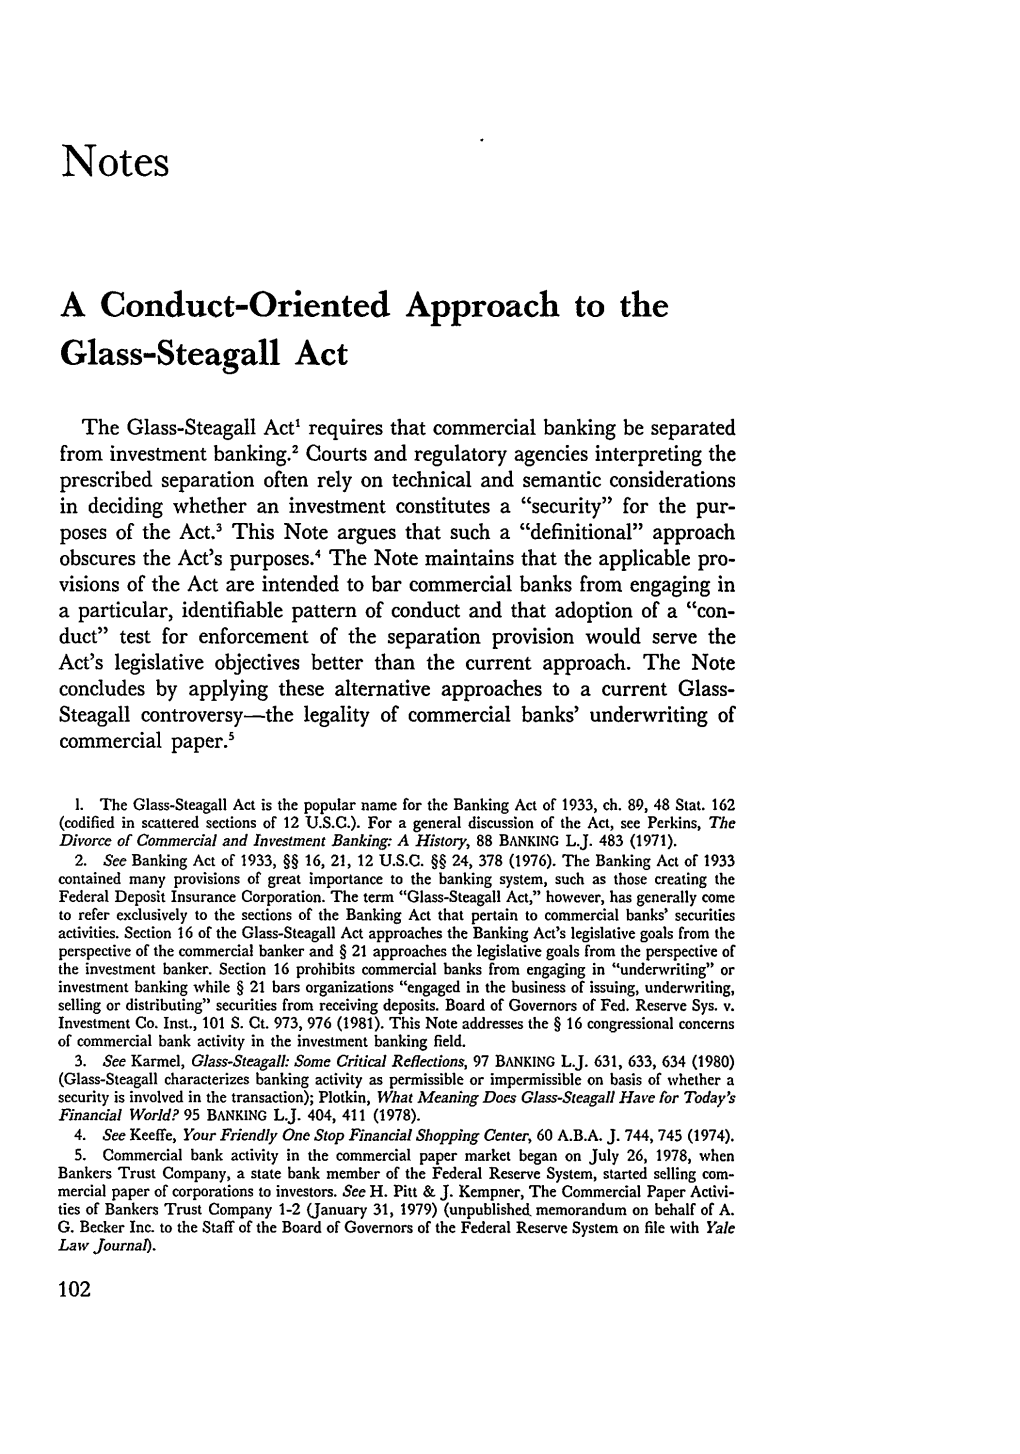 A Conduct-Oriented Approach to the Glass-Steagall Act